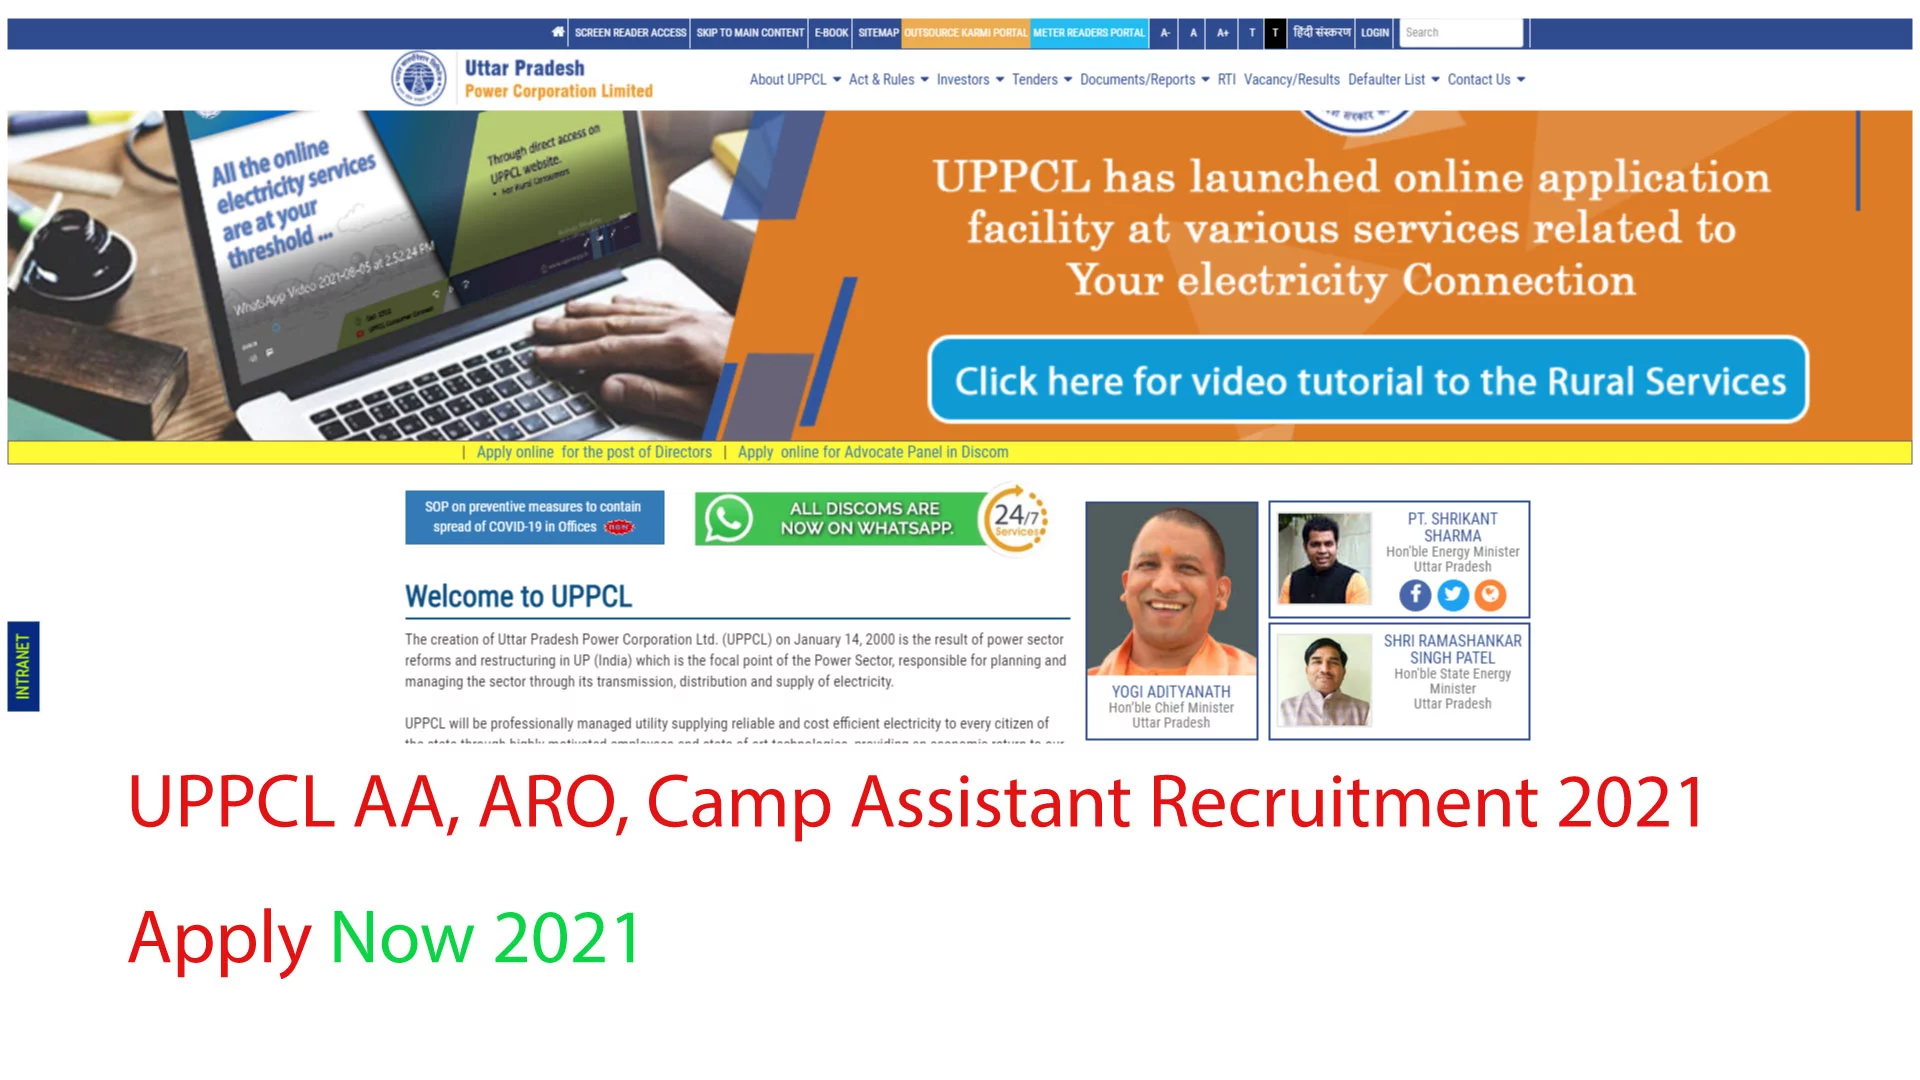 UPPCL Recruitment 2021 AA, ARO, Camp Assistant Apply online